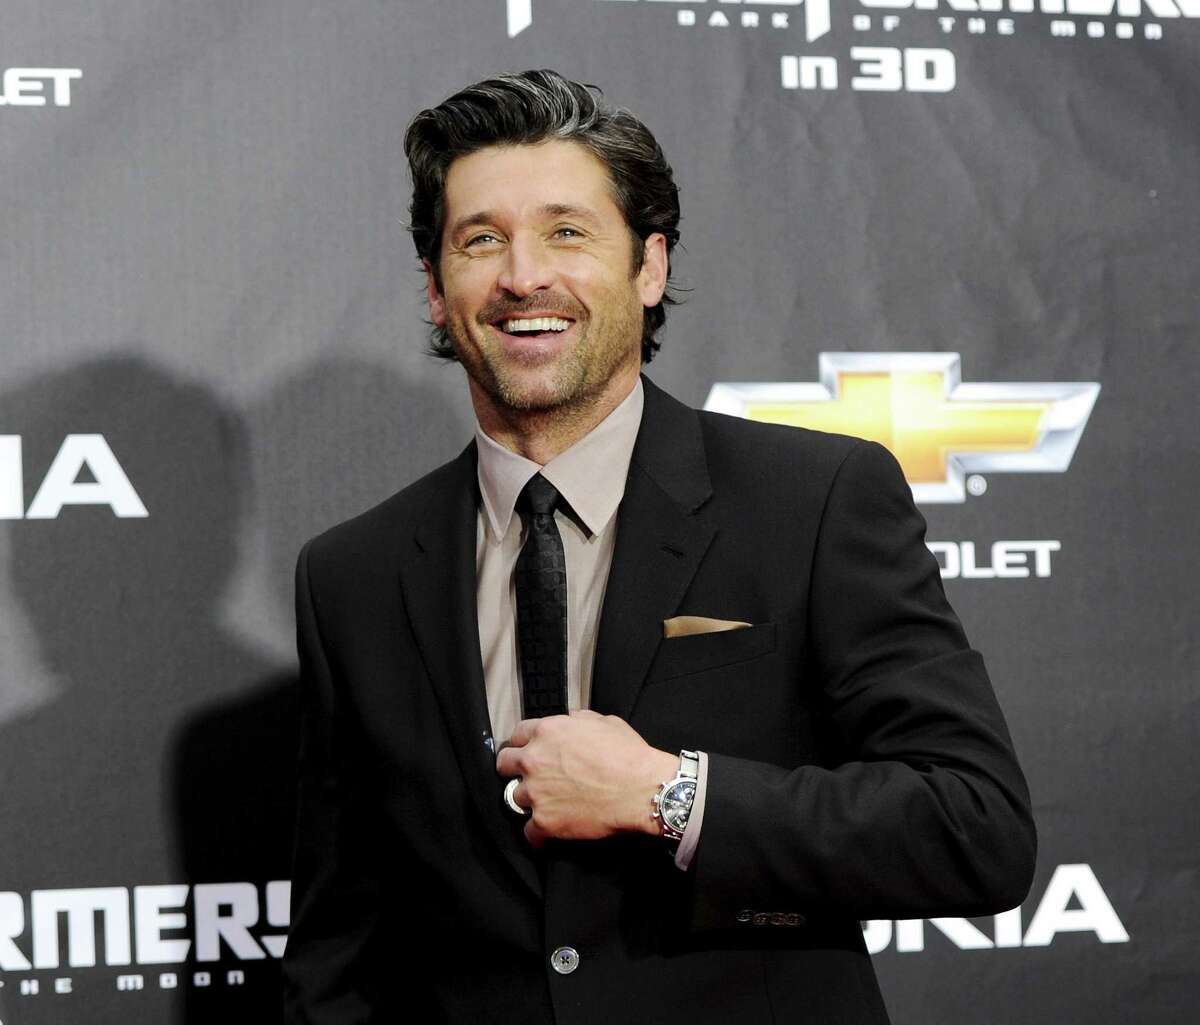 In this June 28, 2011 photo, actor Patrick Dempsey attends the “Transformers: Dark Of The Moon’” premiere in Times Square in New York.